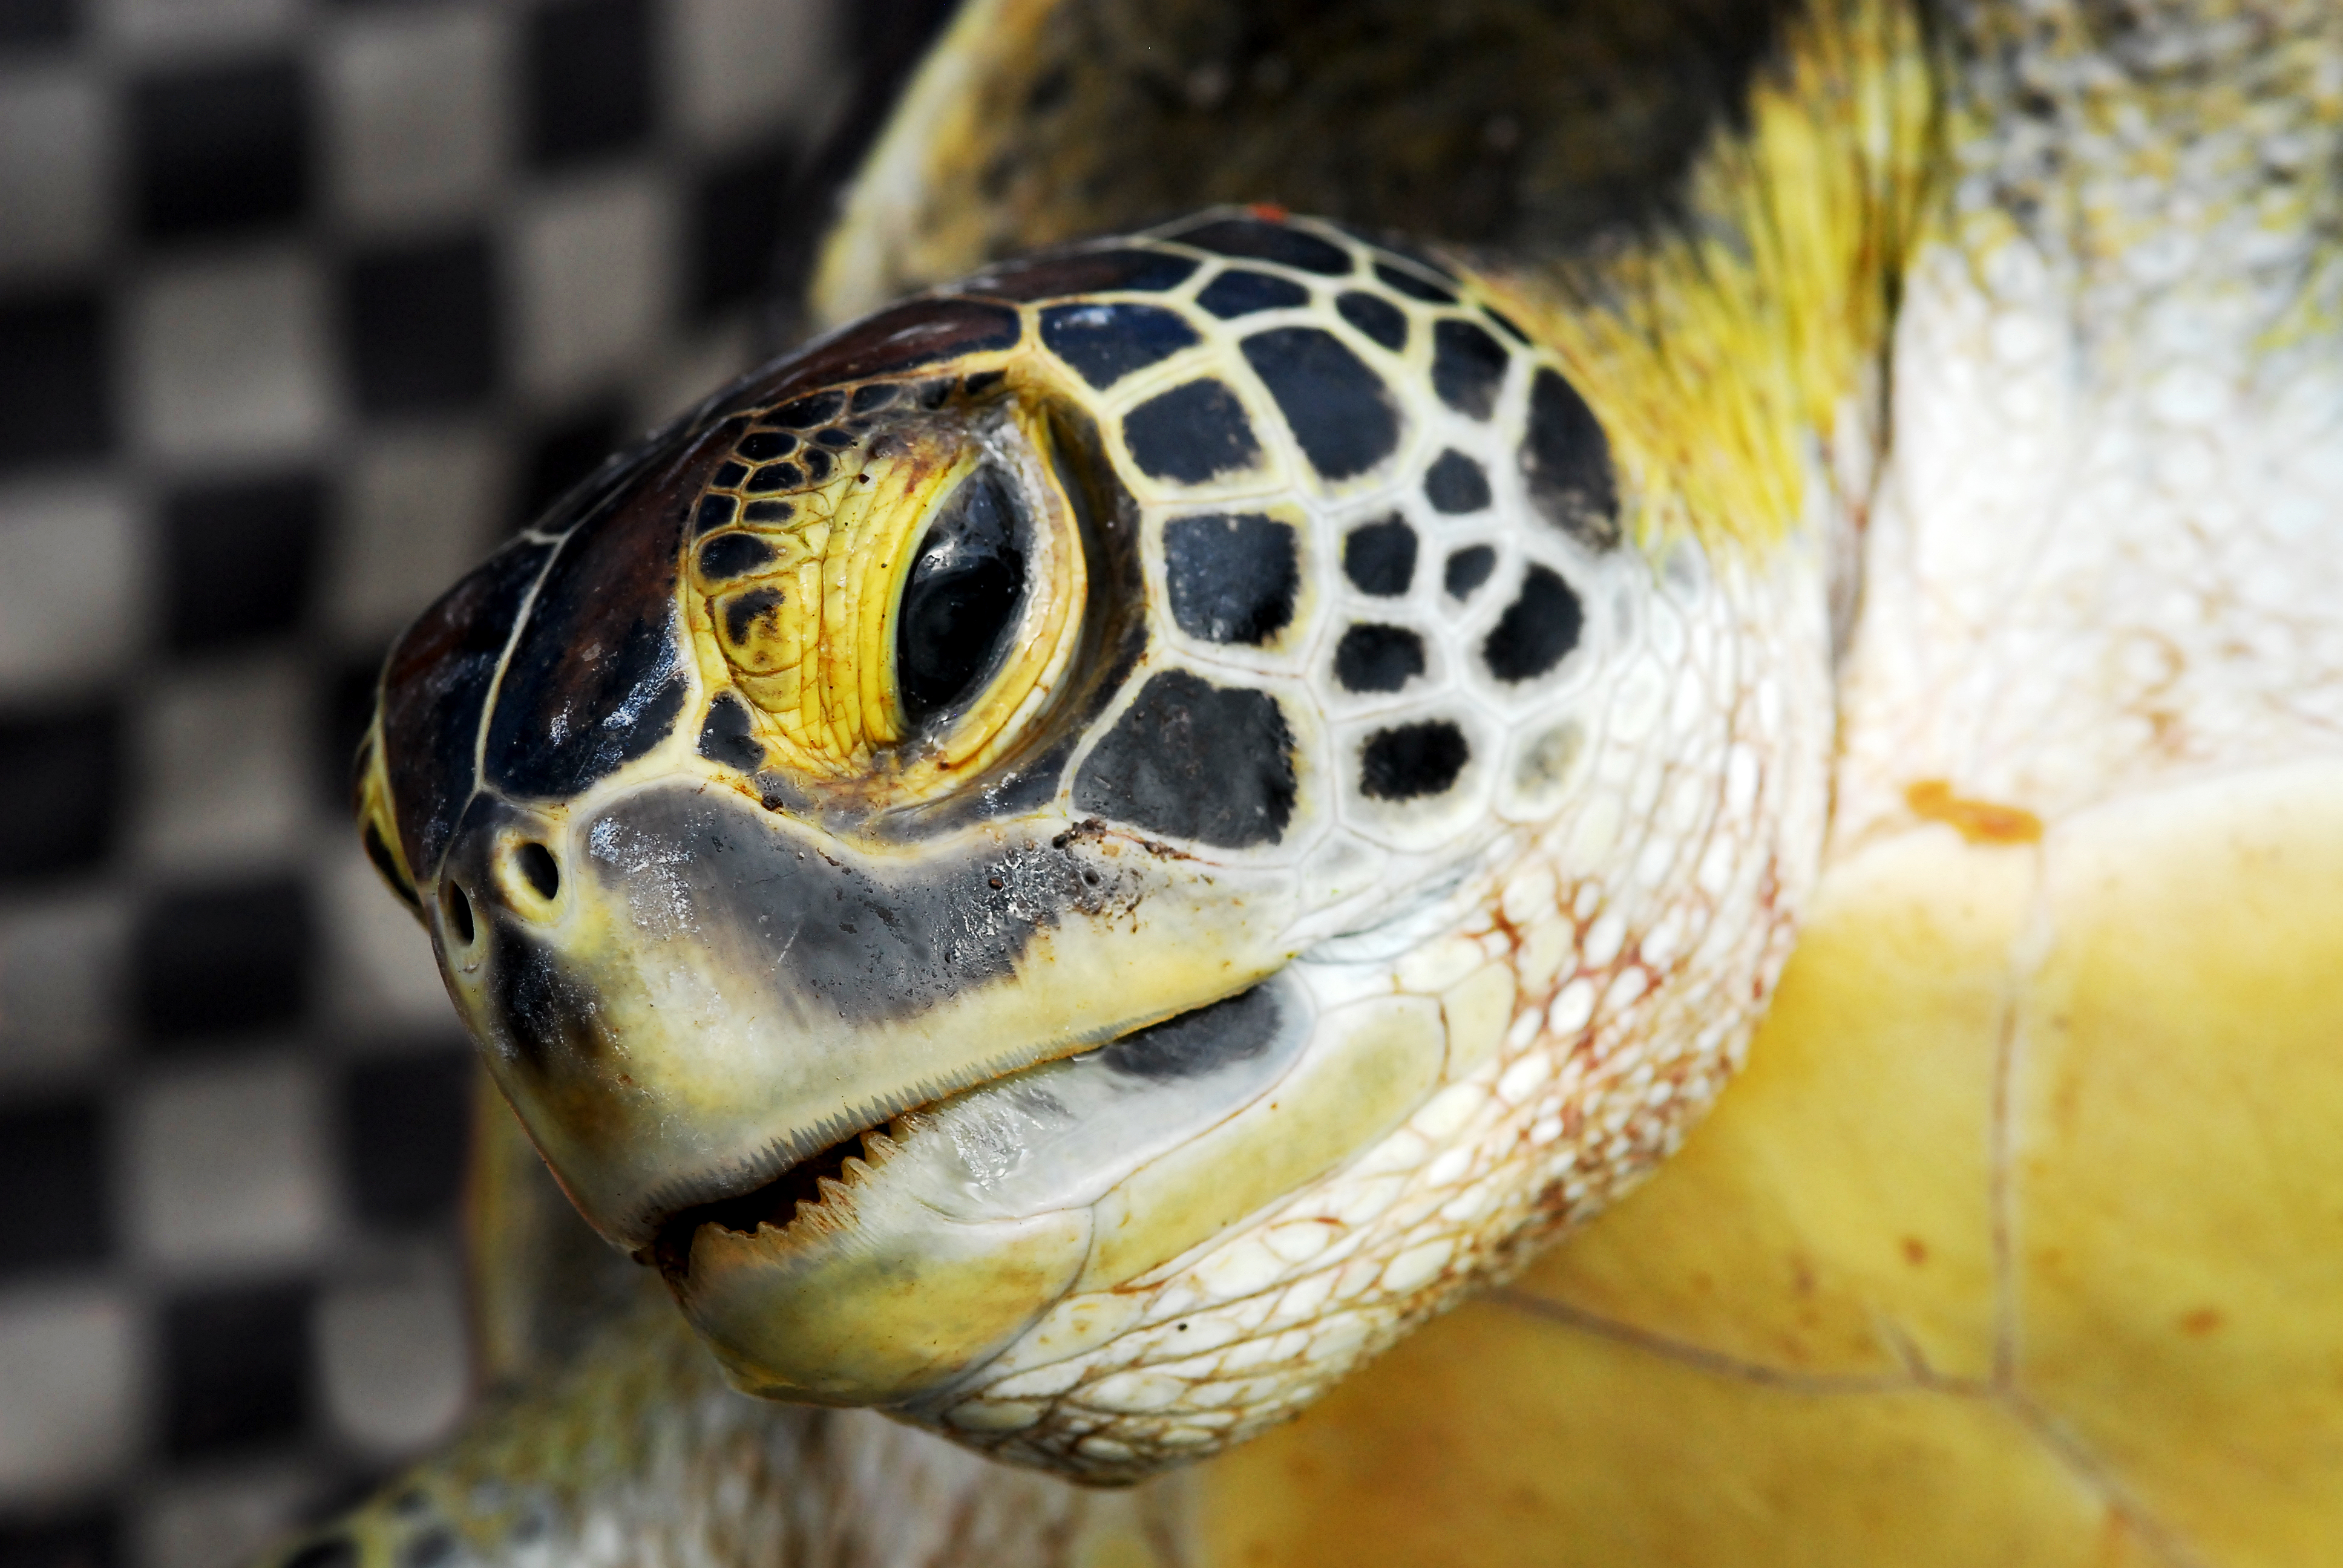 File:Turtle head from Port Moresby.jpg - Wikimedia Commons